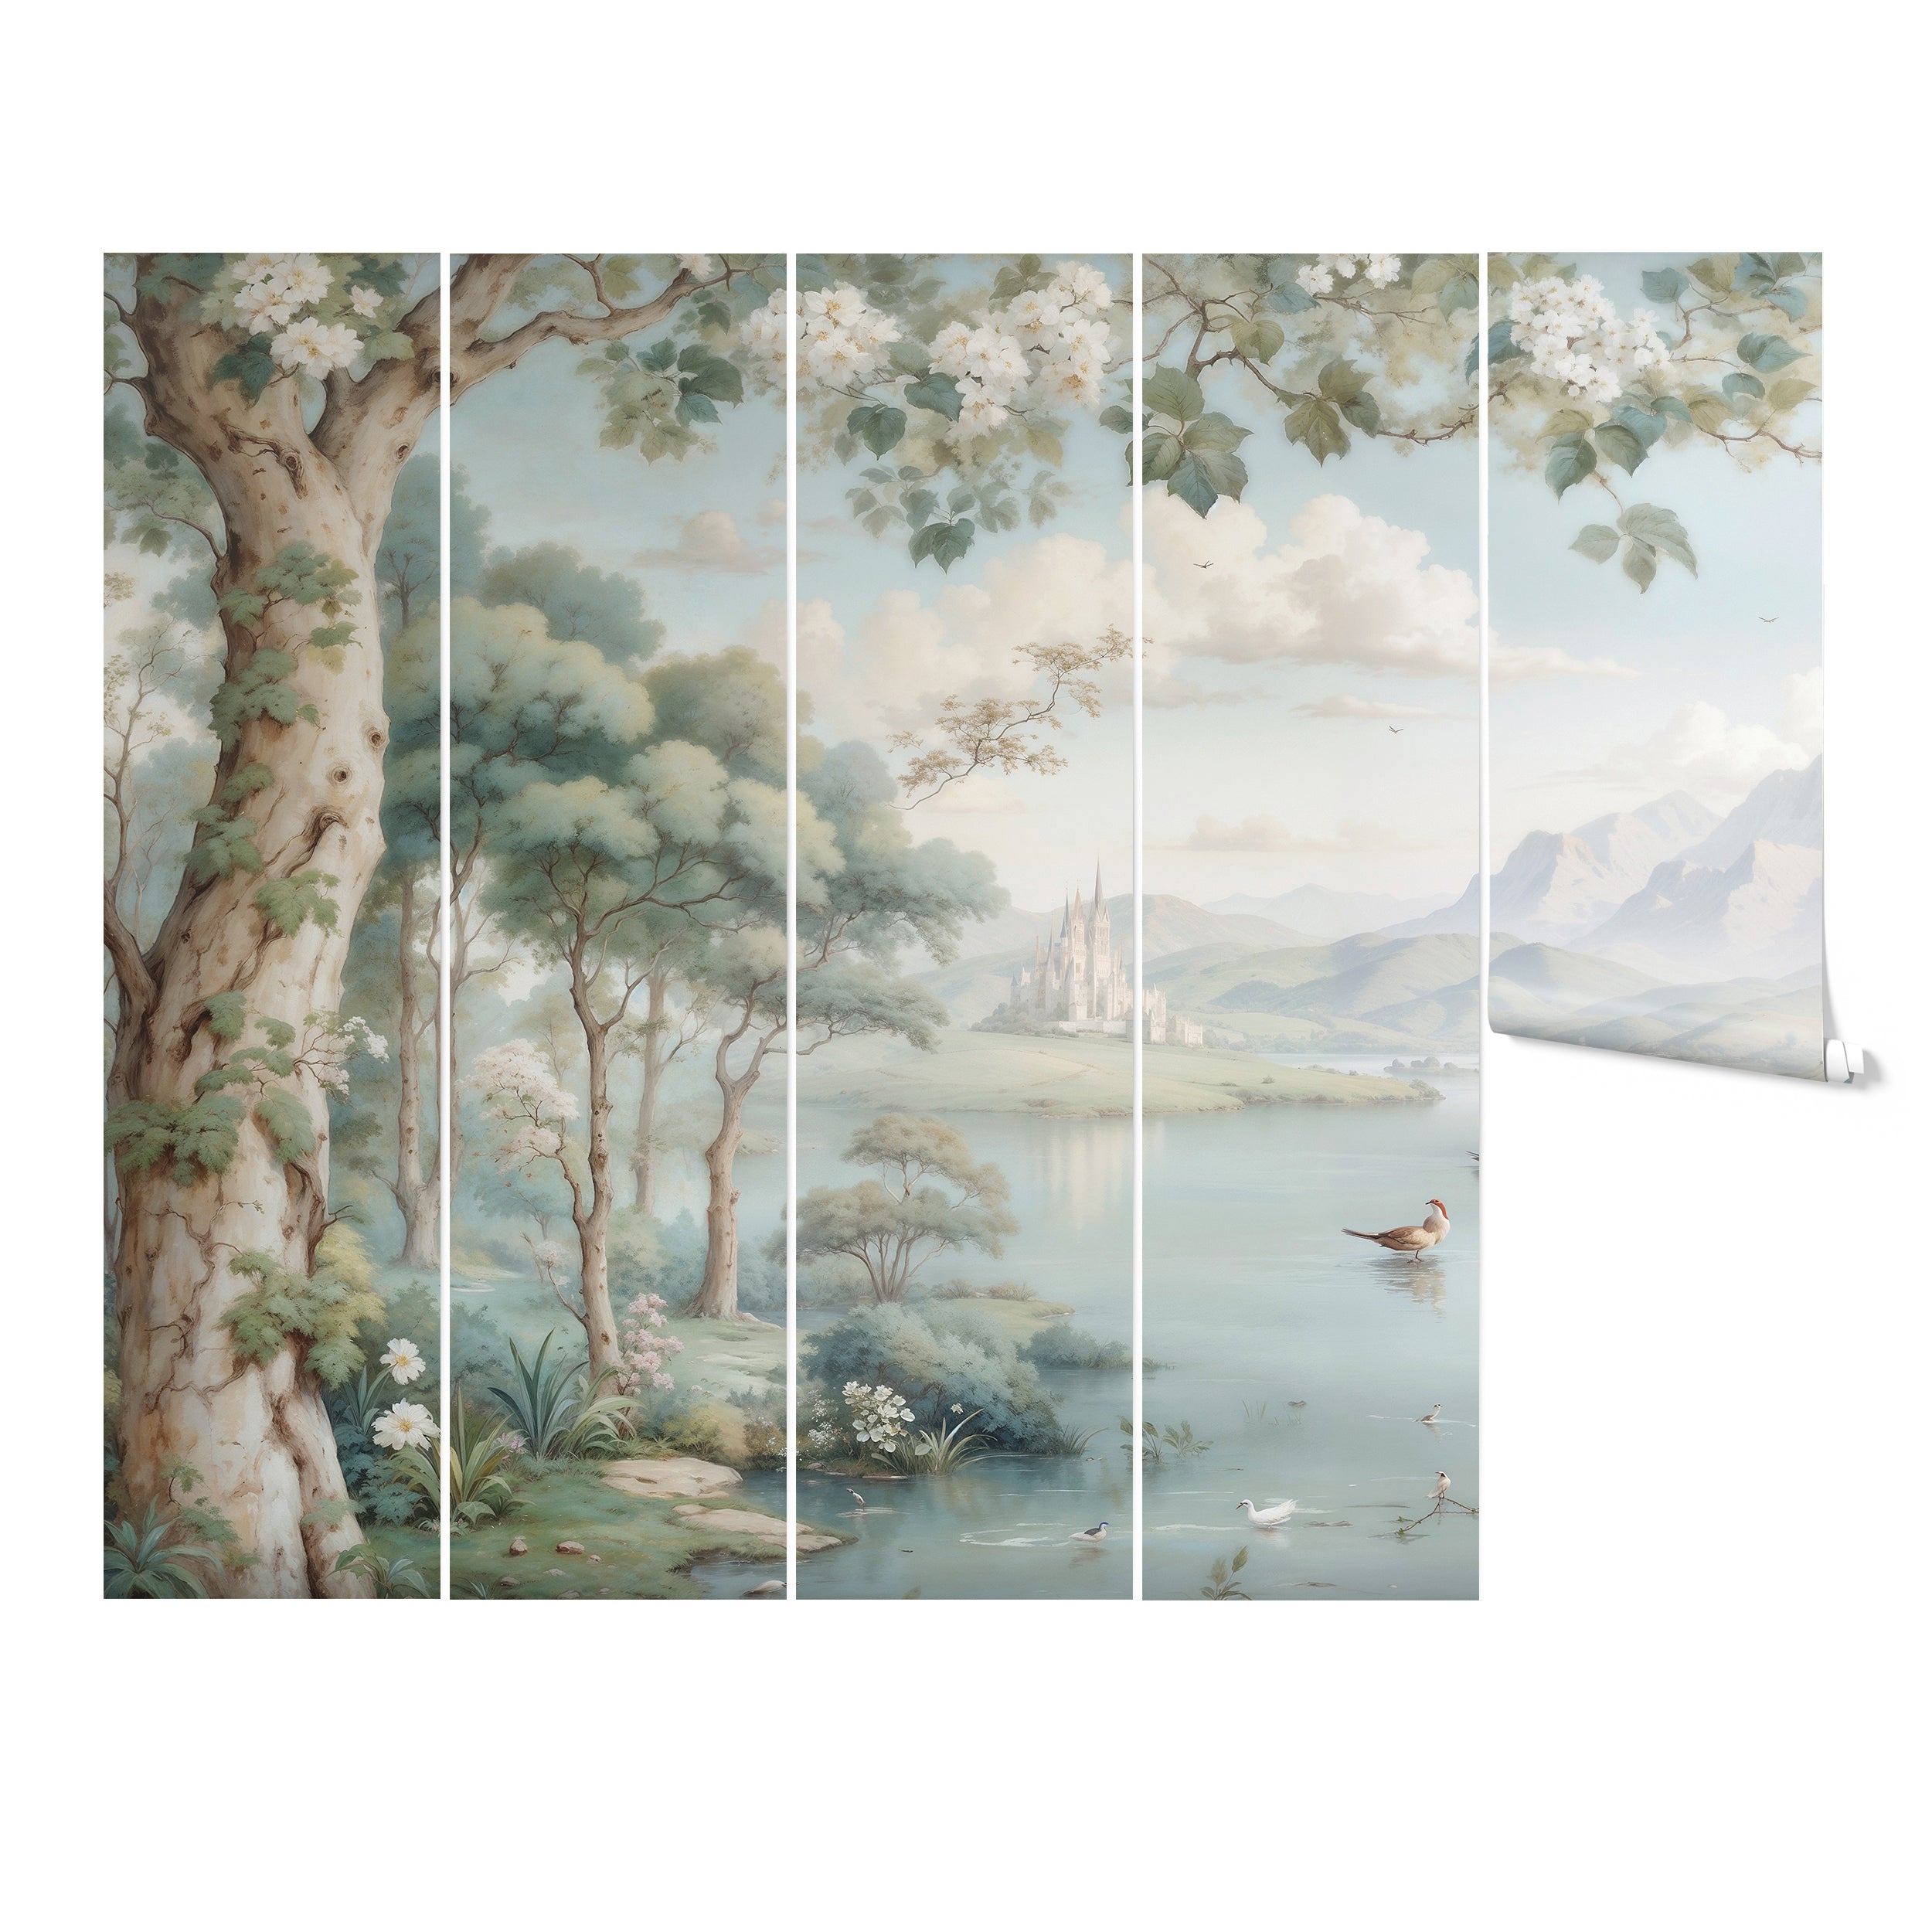 "Rolled wallpaper panels of the Chamonix Valley mural ready for installation, featuring a picturesque valley and castle landscape."